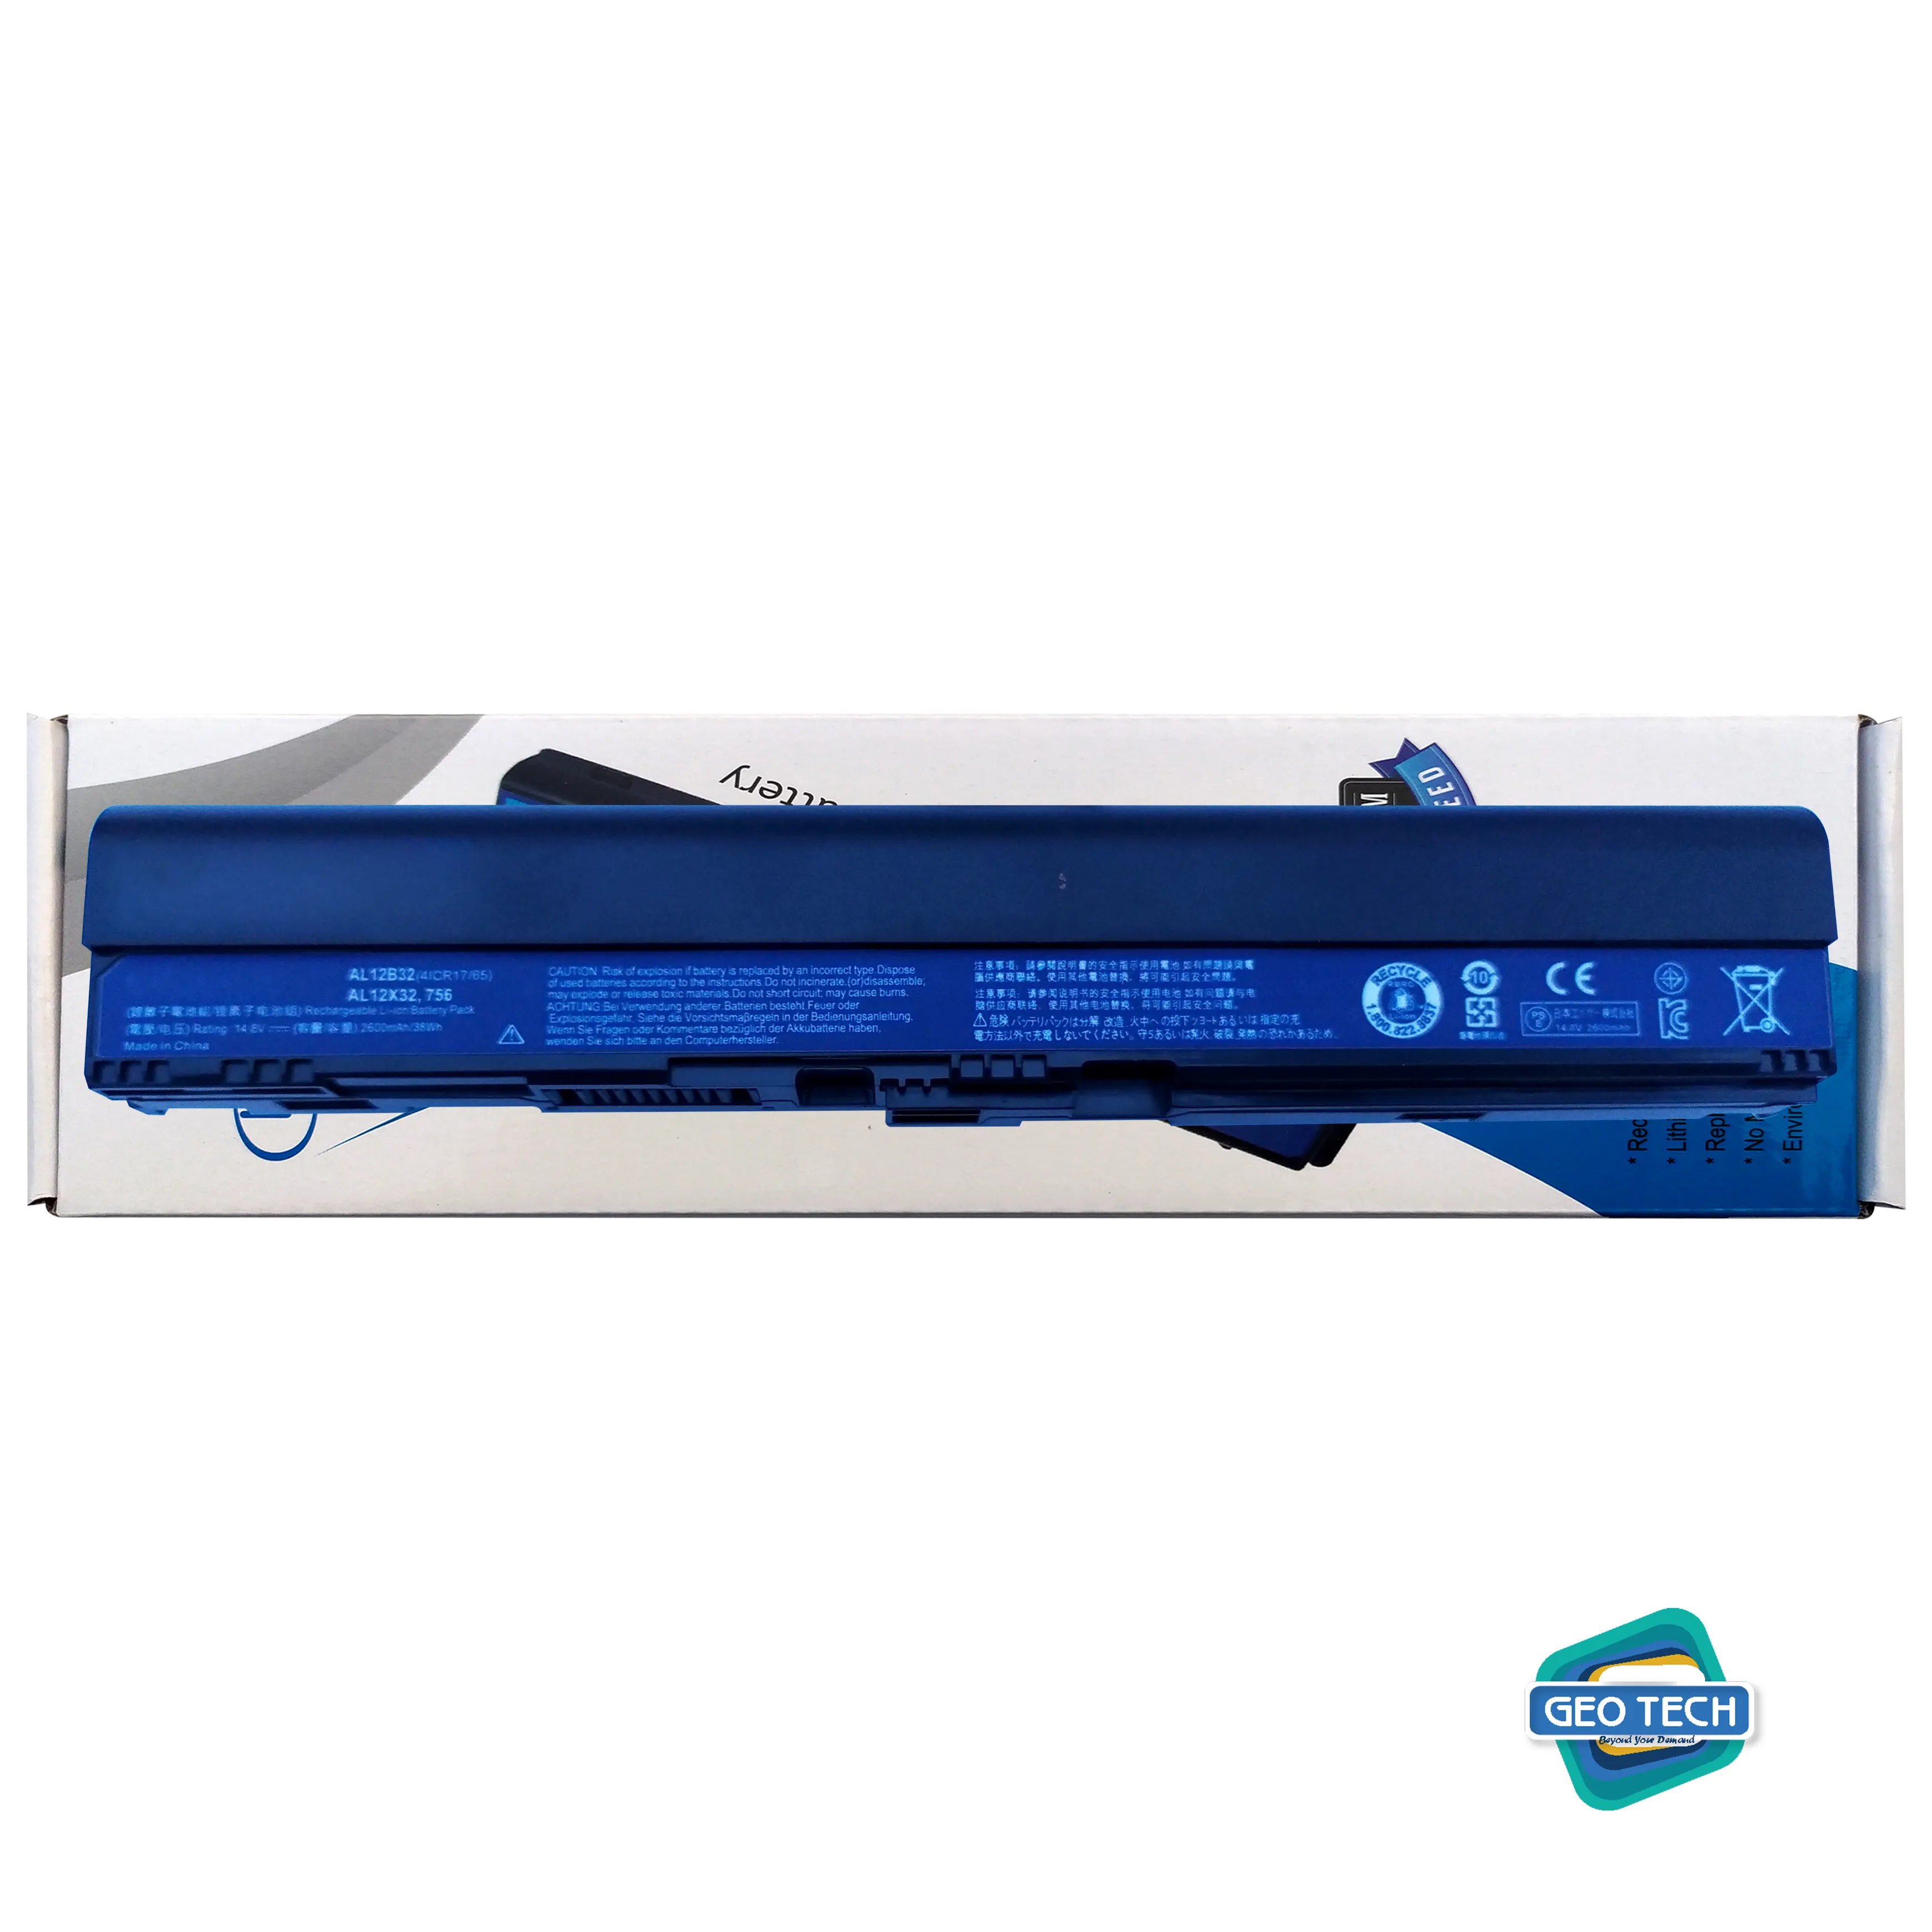 Replacement 14.8V Battery for Acer Aspire One 725 756 AO725-0412 AO725-0488 AO725-0688 AO725-0802 AO725-0825 AO725-0899 AO756 AO756-2420 AO756-2623 AO756-2808 AO756-4854, 4 Cells